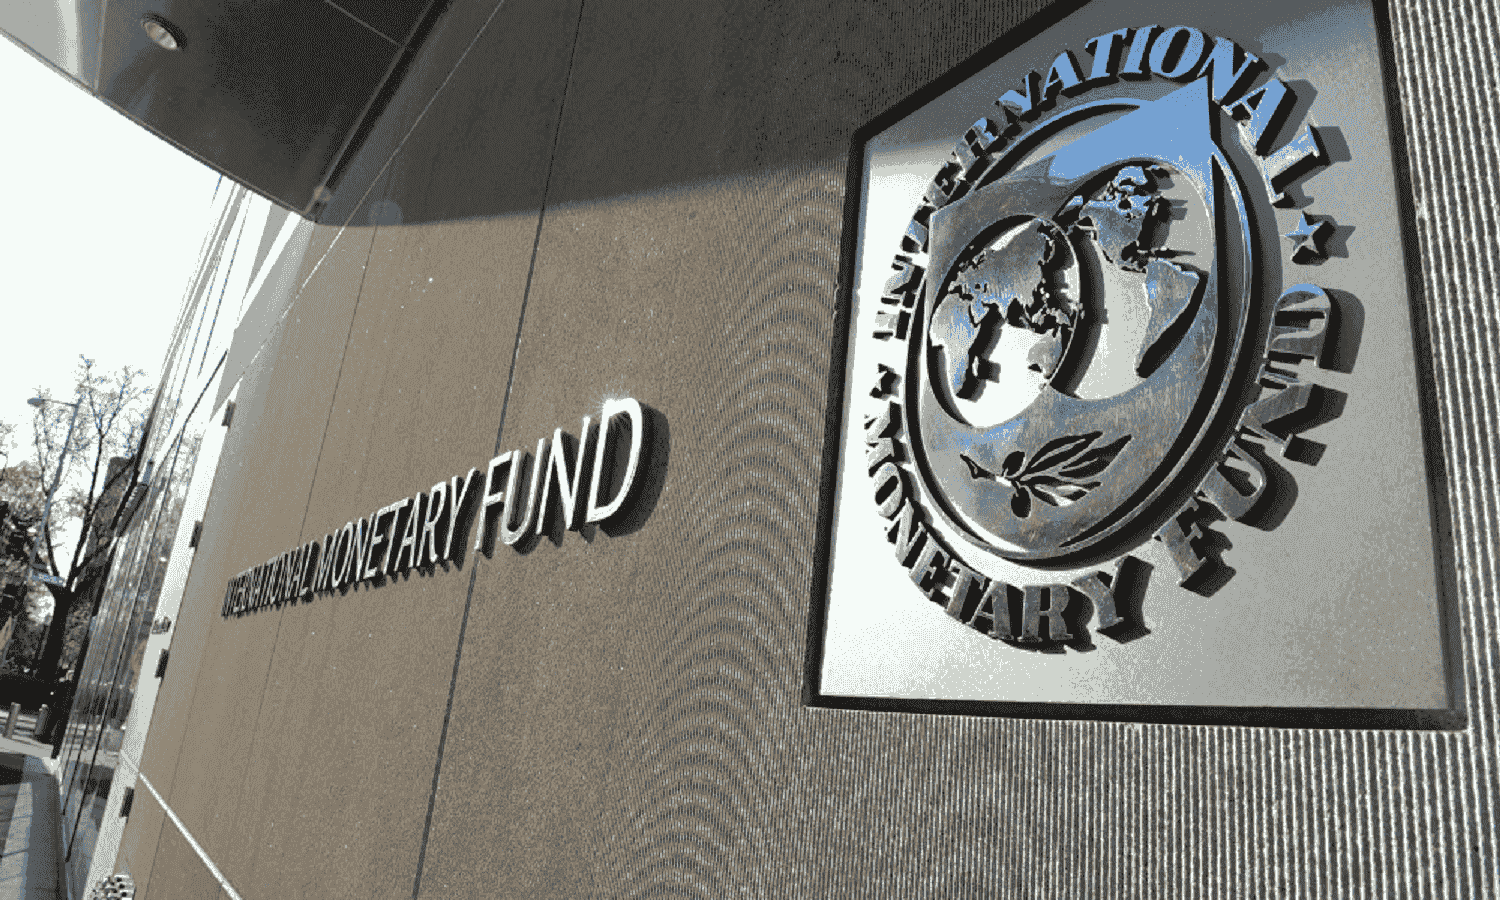 IMF seeks to build up consultation, cooperation with Egypt